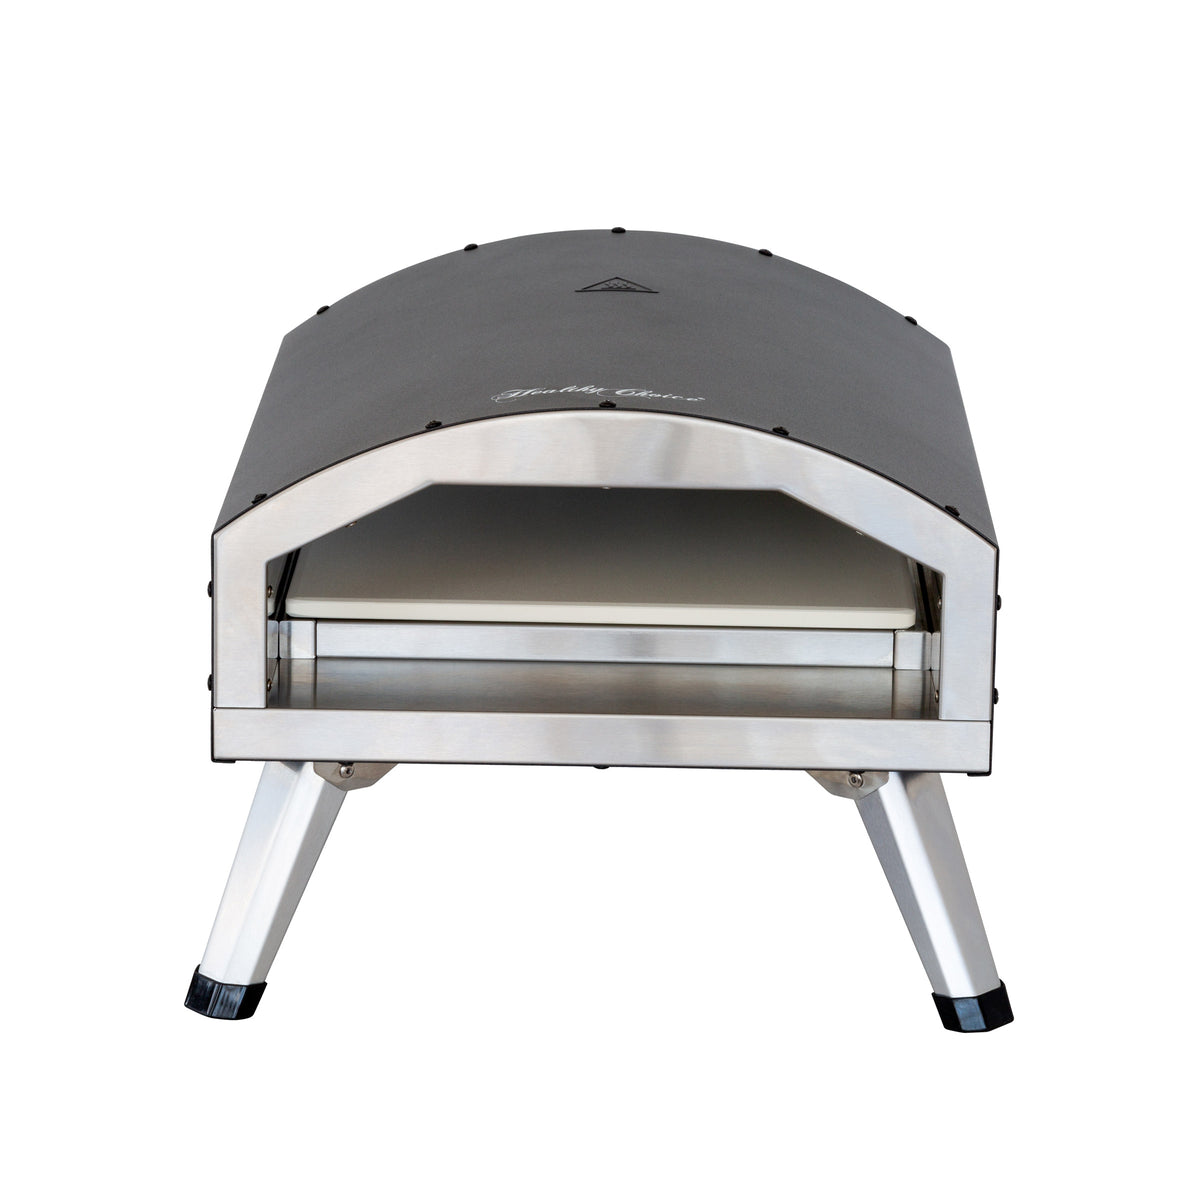 Front view of the Healthy Choice 12" Outdoor Electric Pizza Oven.